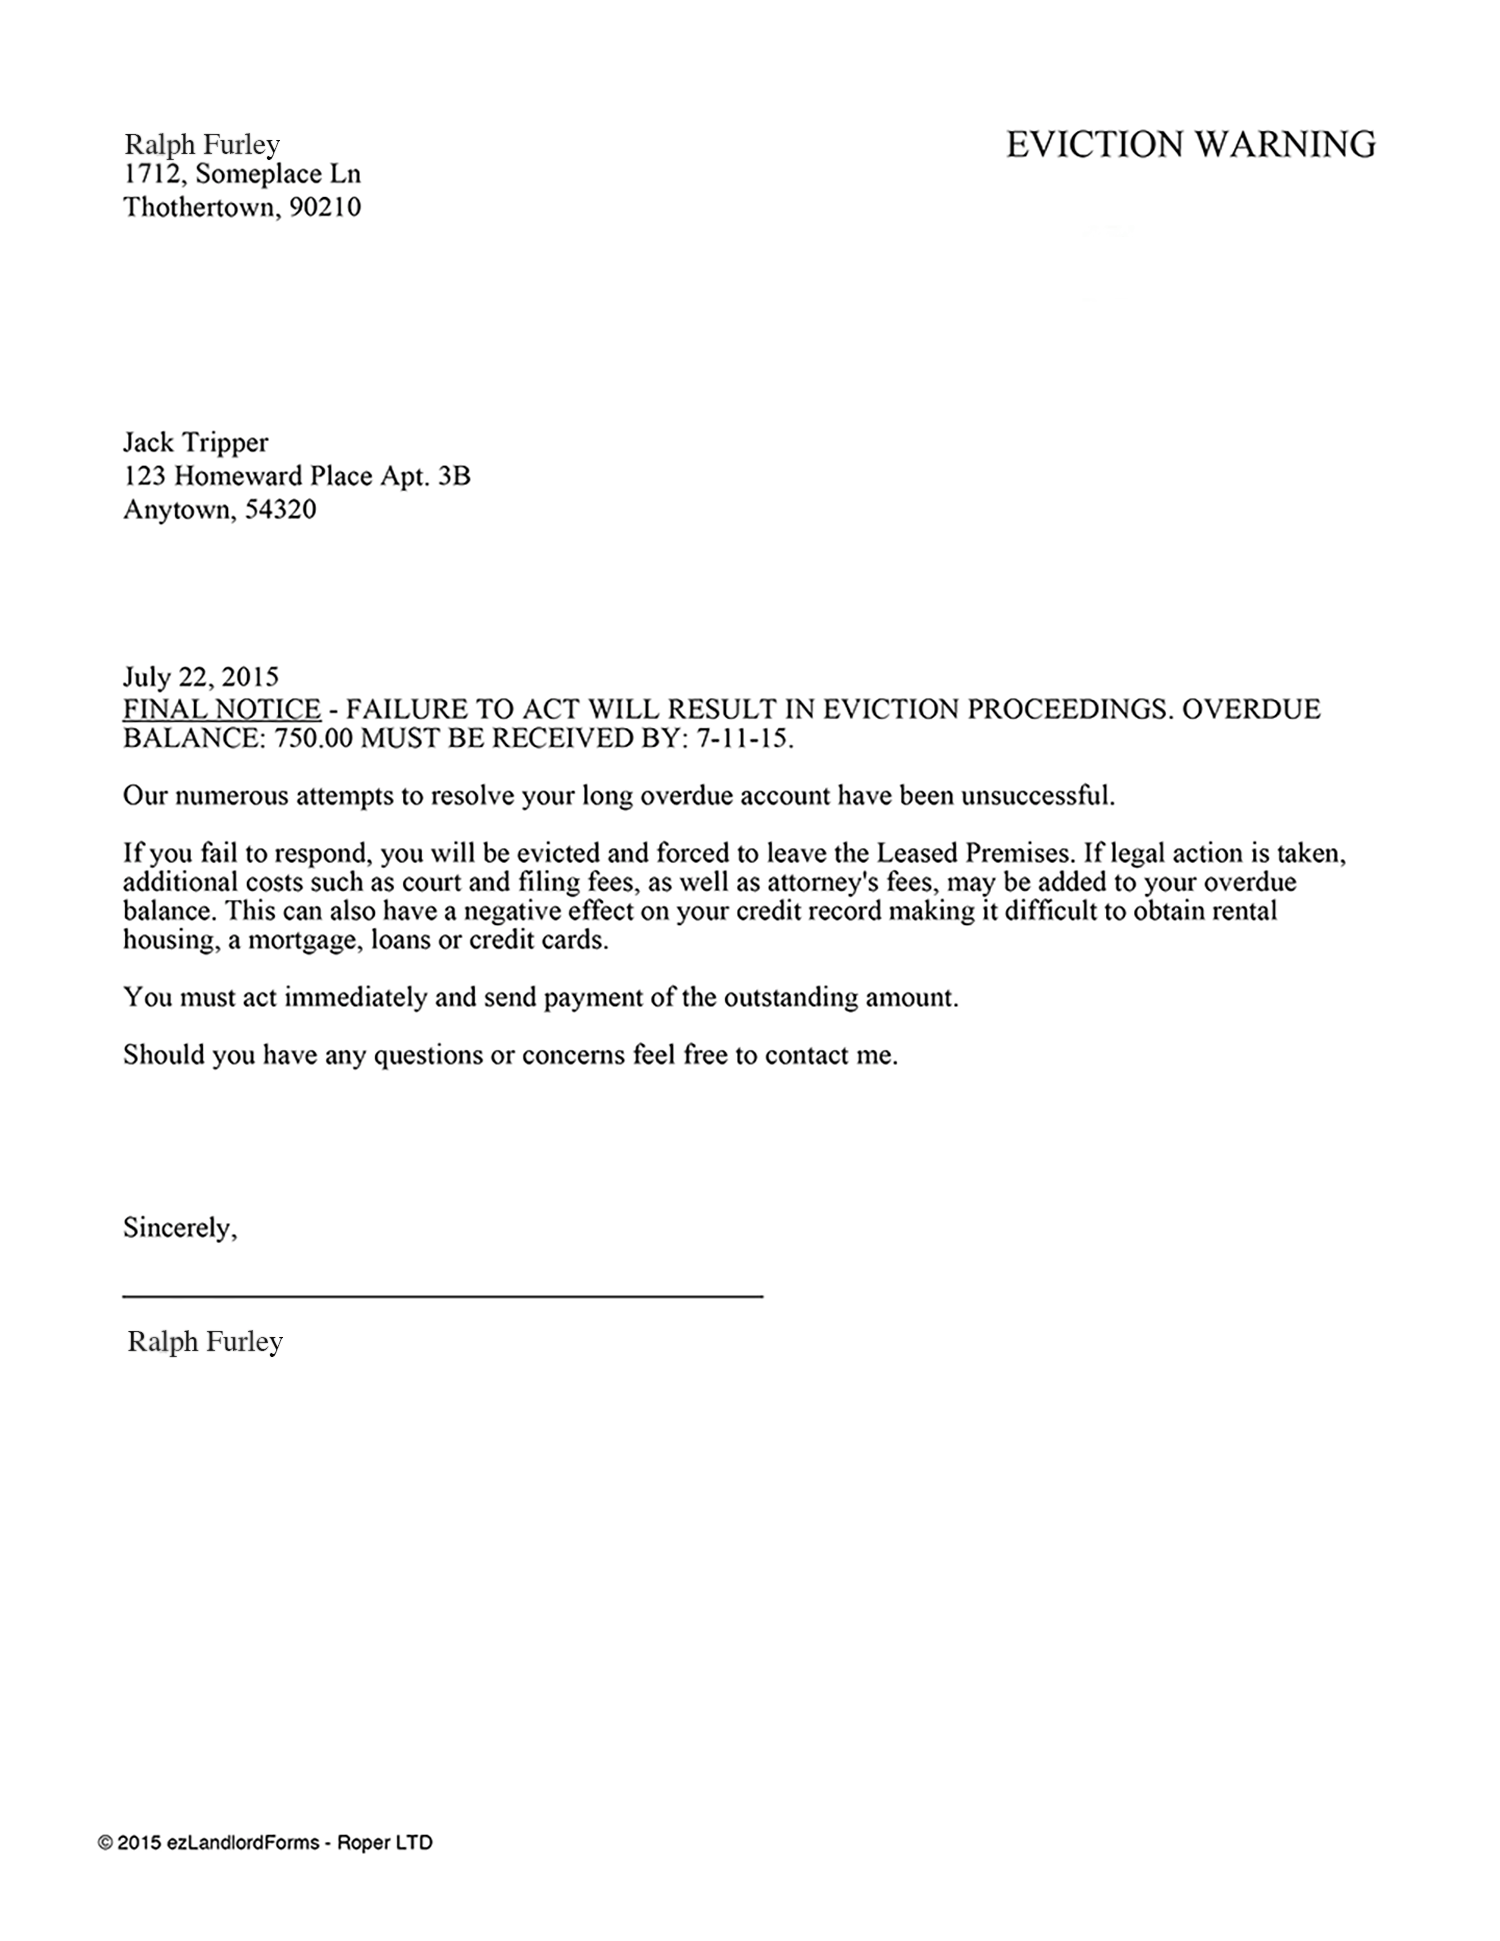 Form Letter For Eviction Notice from www.ezlandlordforms.com